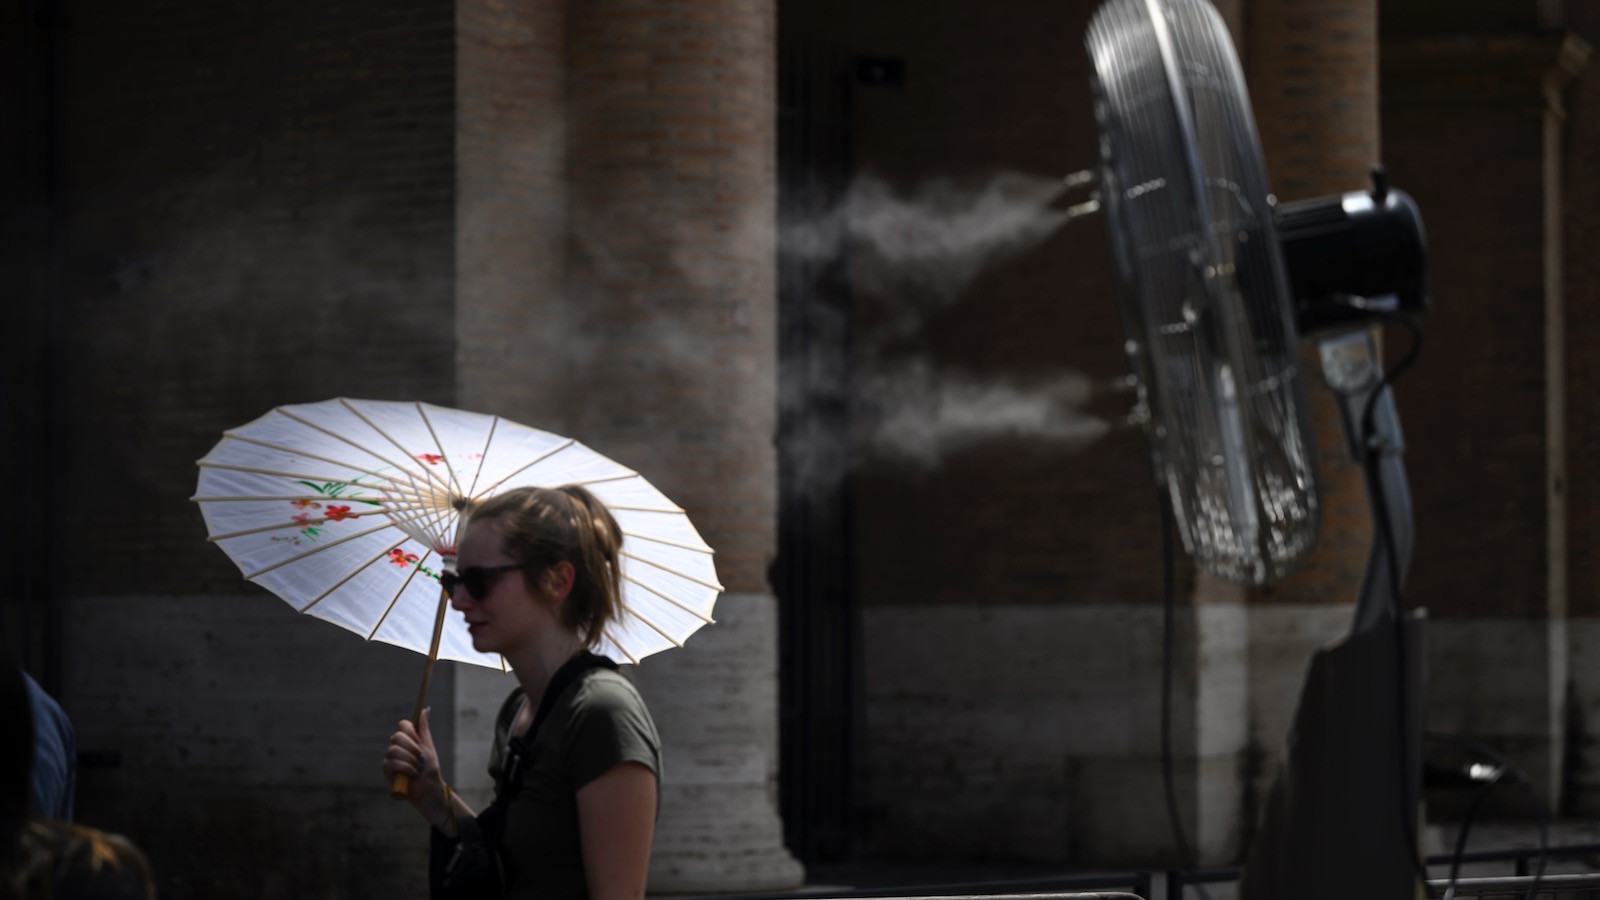 A young woman carrying a parasol walks past an electric fan blowing cool mist over a sidewalk in Rome as temperatures reach 44 degrees Celsius (111 degrees Fahrenheit).